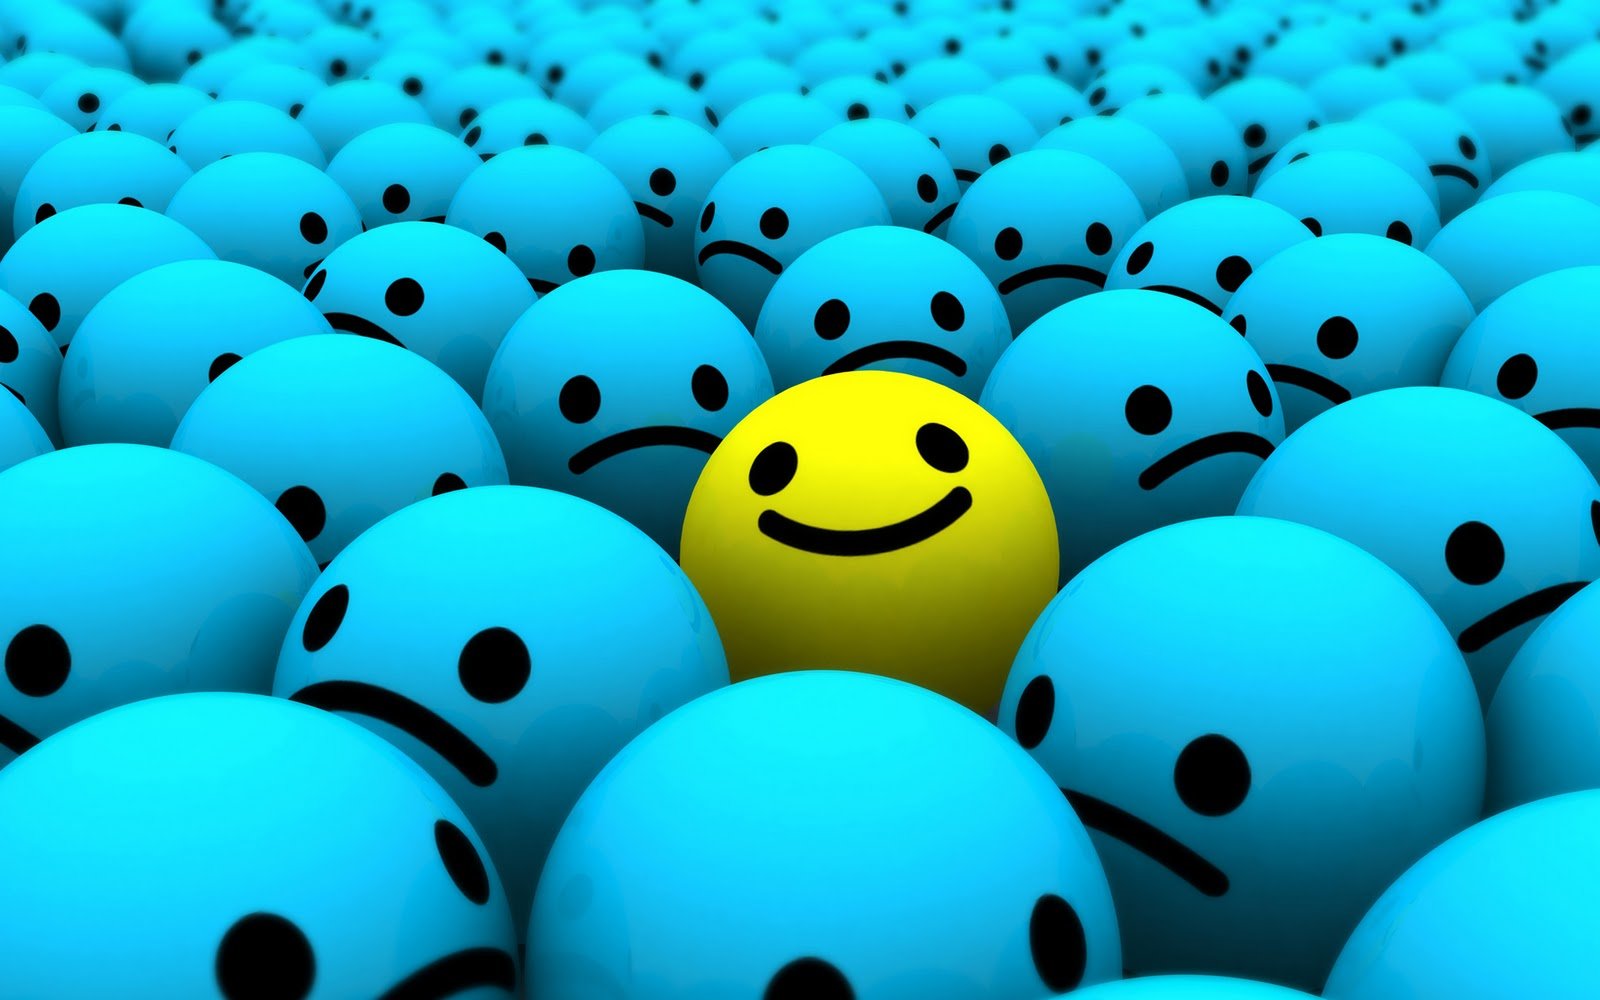 WallpaperfreekS HD Smile Emoticons Wallpapers